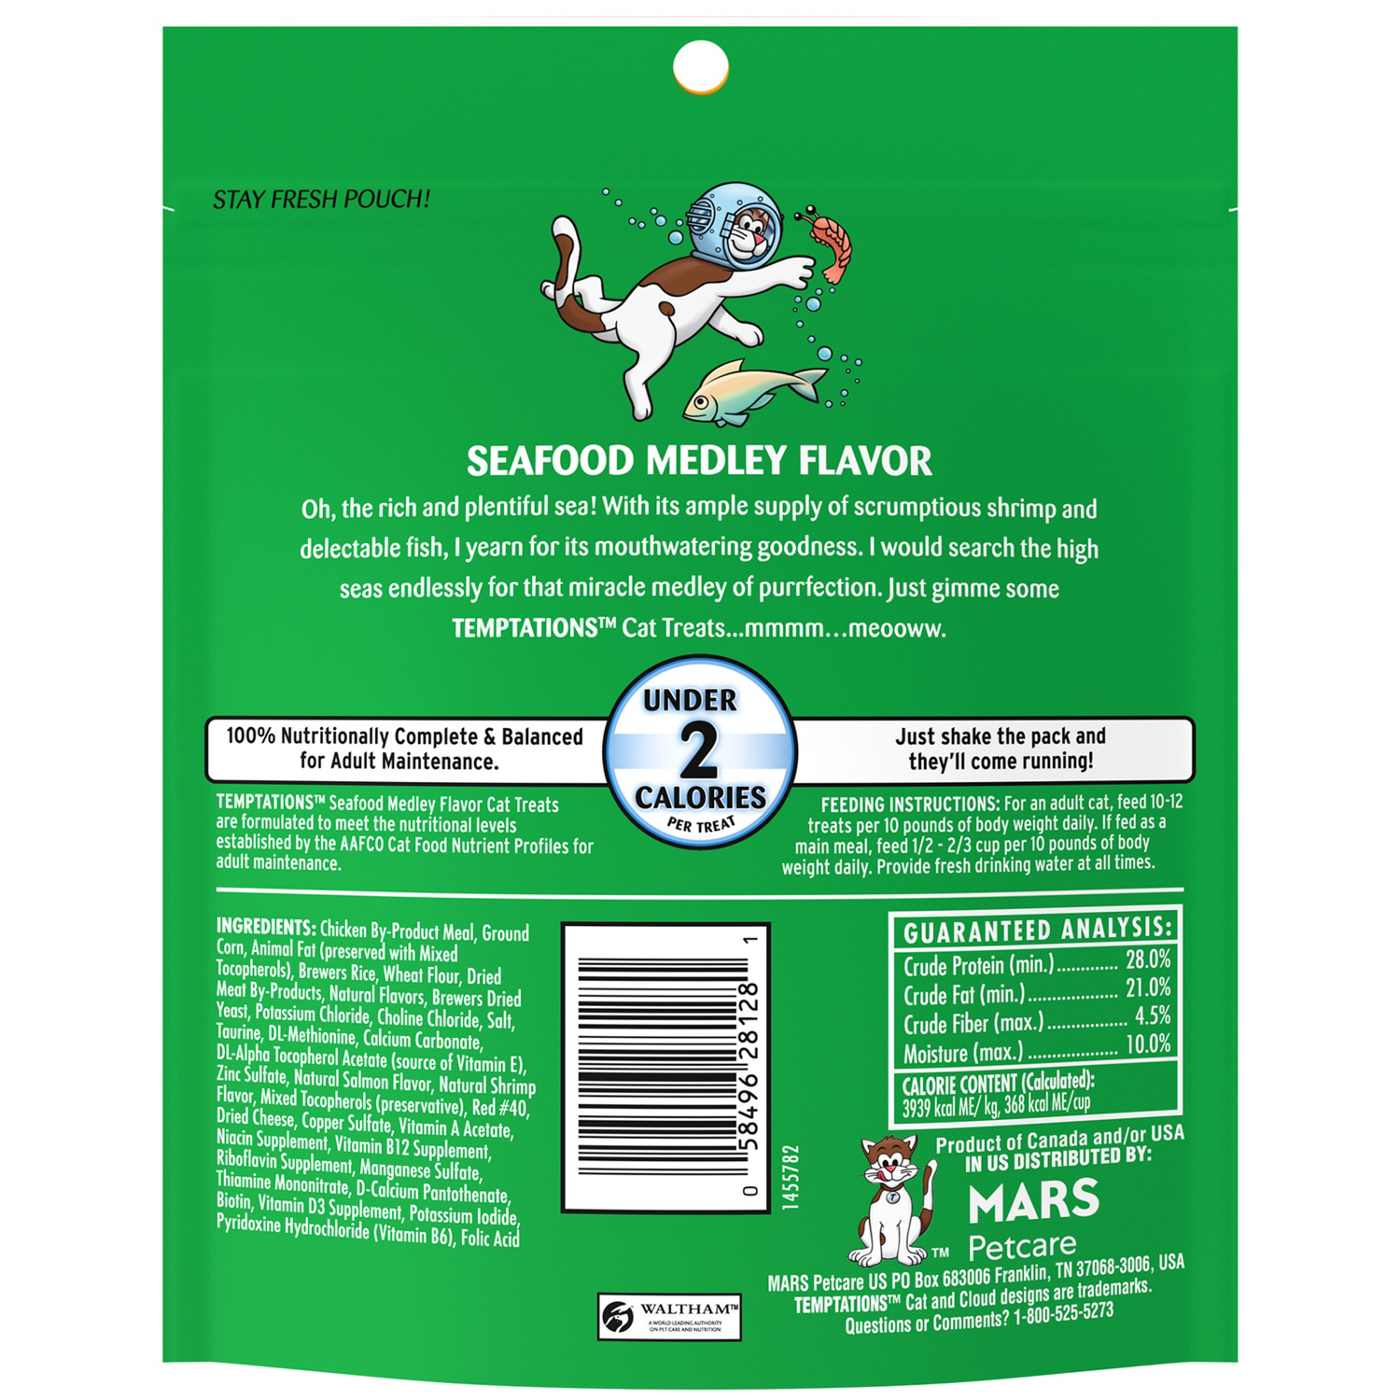 Temptations Classic Crunchy and Soft Cat Treats Seafood Medley Flavor; image 5 of 5